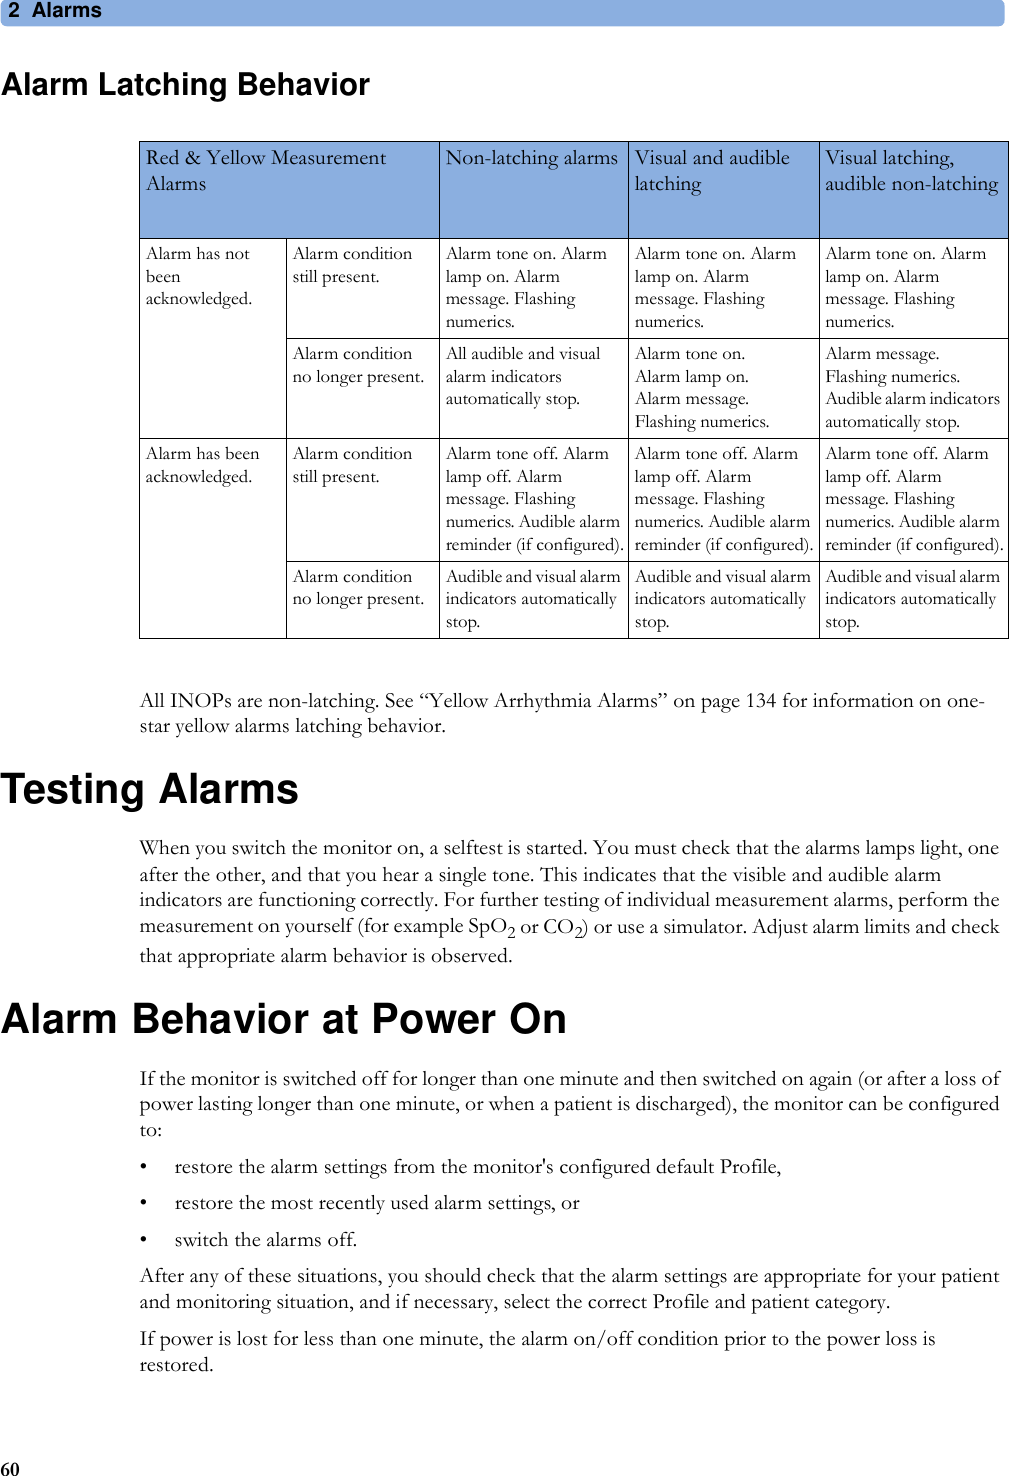 2Alarms60Alarm Latching BehaviorAll INOPs are non-latching. See “Yellow Arrhythmia Alarms” on page 134 for information on one-star yellow alarms latching behavior.Testing AlarmsWhen you switch the monitor on, a selftest is started. You must check that the alarms lamps light, one after the other, and that you hear a single tone. This indicates that the visible and audible alarm indicators are functioning correctly. For further testing of individual measurement alarms, perform the measurement on yourself (for example SpO2 or CO2) or use a simulator. Adjust alarm limits and check that appropriate alarm behavior is observed.Alarm Behavior at Power OnIf the monitor is switched off for longer than one minute and then switched on again (or after a loss of power lasting longer than one minute, or when a patient is discharged), the monitor can be configured to:• restore the alarm settings from the monitor&apos;s configured default Profile,• restore the most recently used alarm settings, or • switch the alarms off. After any of these situations, you should check that the alarm settings are appropriate for your patient and monitoring situation, and if necessary, select the correct Profile and patient category.If power is lost for less than one minute, the alarm on/off condition prior to the power loss is restored.Red &amp; Yellow Measurement AlarmsNon-latching alarms Visual and audible latchingVisual latching, audible non-latchingAlarm has not been acknowledged.Alarm condition still present.Alarm tone on. Alarm lamp on. Alarm message. Flashing numerics.Alarm tone on. Alarm lamp on. Alarm message. Flashing numerics.Alarm tone on. Alarm lamp on. Alarm message. Flashing numerics.Alarm condition no longer present.All audible and visual alarm indicators automatically stop.Alarm tone on.Alarm lamp on. Alarm message. Flashing numerics.Alarm message. Flashing numerics.Audible alarm indicators automatically stop.Alarm has been acknowledged.Alarm condition still present.Alarm tone off. Alarm lamp off. Alarm message. Flashing numerics. Audible alarm reminder (if configured).Alarm tone off. Alarm lamp off. Alarm message. Flashing numerics. Audible alarm reminder (if configured).Alarm tone off. Alarm lamp off. Alarm message. Flashing numerics. Audible alarm reminder (if configured).Alarm condition no longer present.Audible and visual alarm indicators automatically stop.Audible and visual alarm indicators automatically stop.Audible and visual alarm indicators automatically stop.